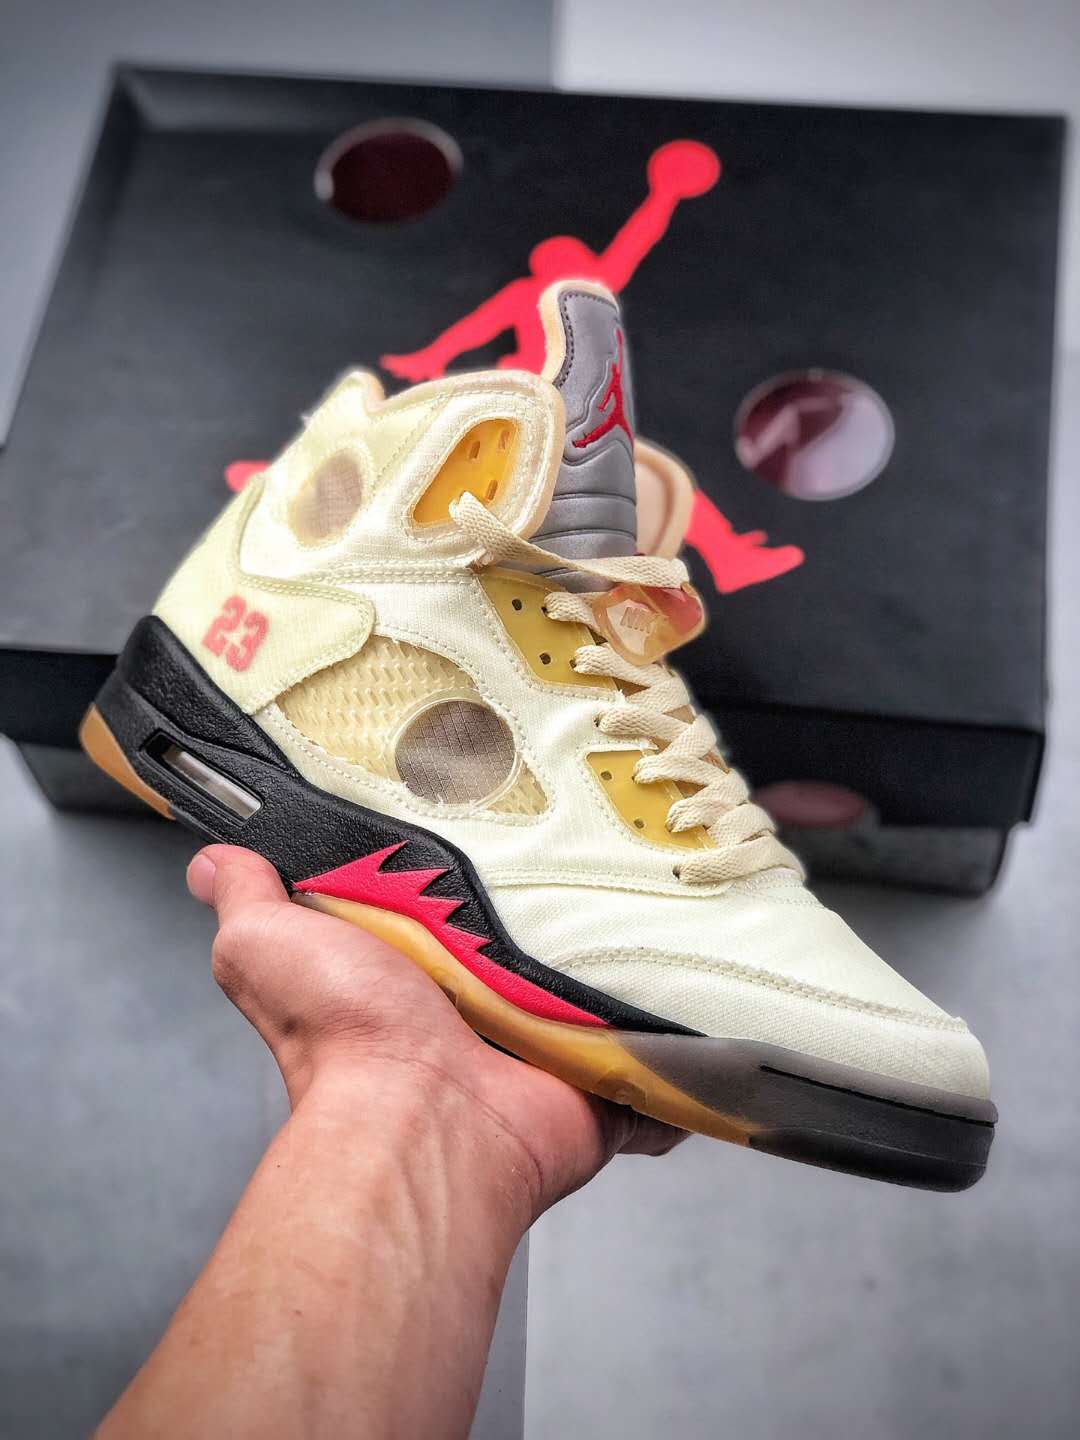 Off-White x Air Jordan 5 SP 'Sail' DH8565-100 | Limited Edition Sneakers